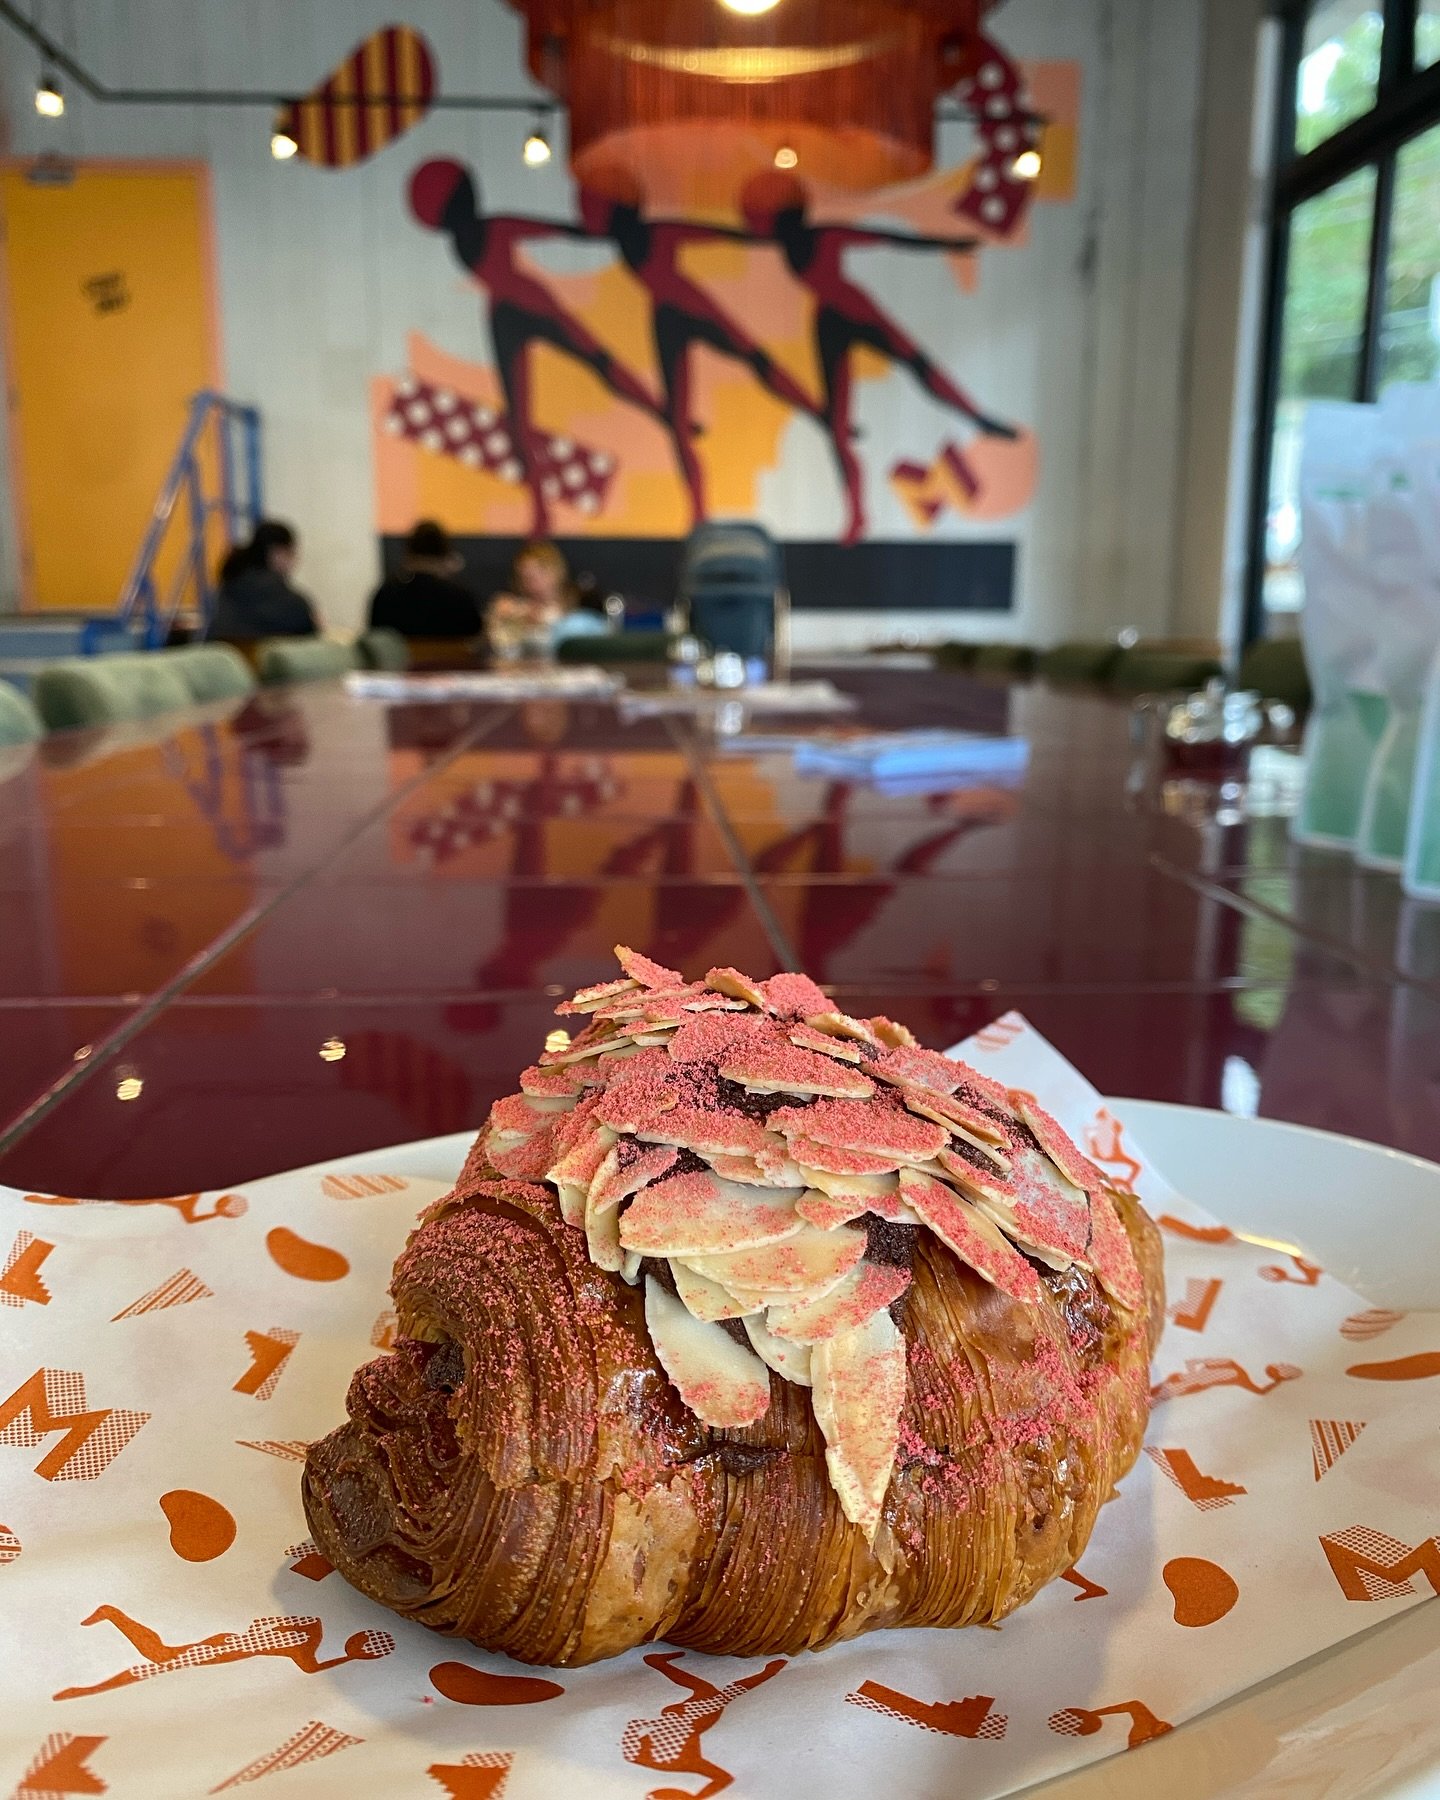 Hello, yes we are open all weekend for Mother&rsquo;s Day and everything else this weekend. For mum&rsquo;s day we&rsquo;ve got a special pastry lined up; Chocolate, almond and strawberry croissant 🥐 chocolate ganache, almond frangipan and strawberr